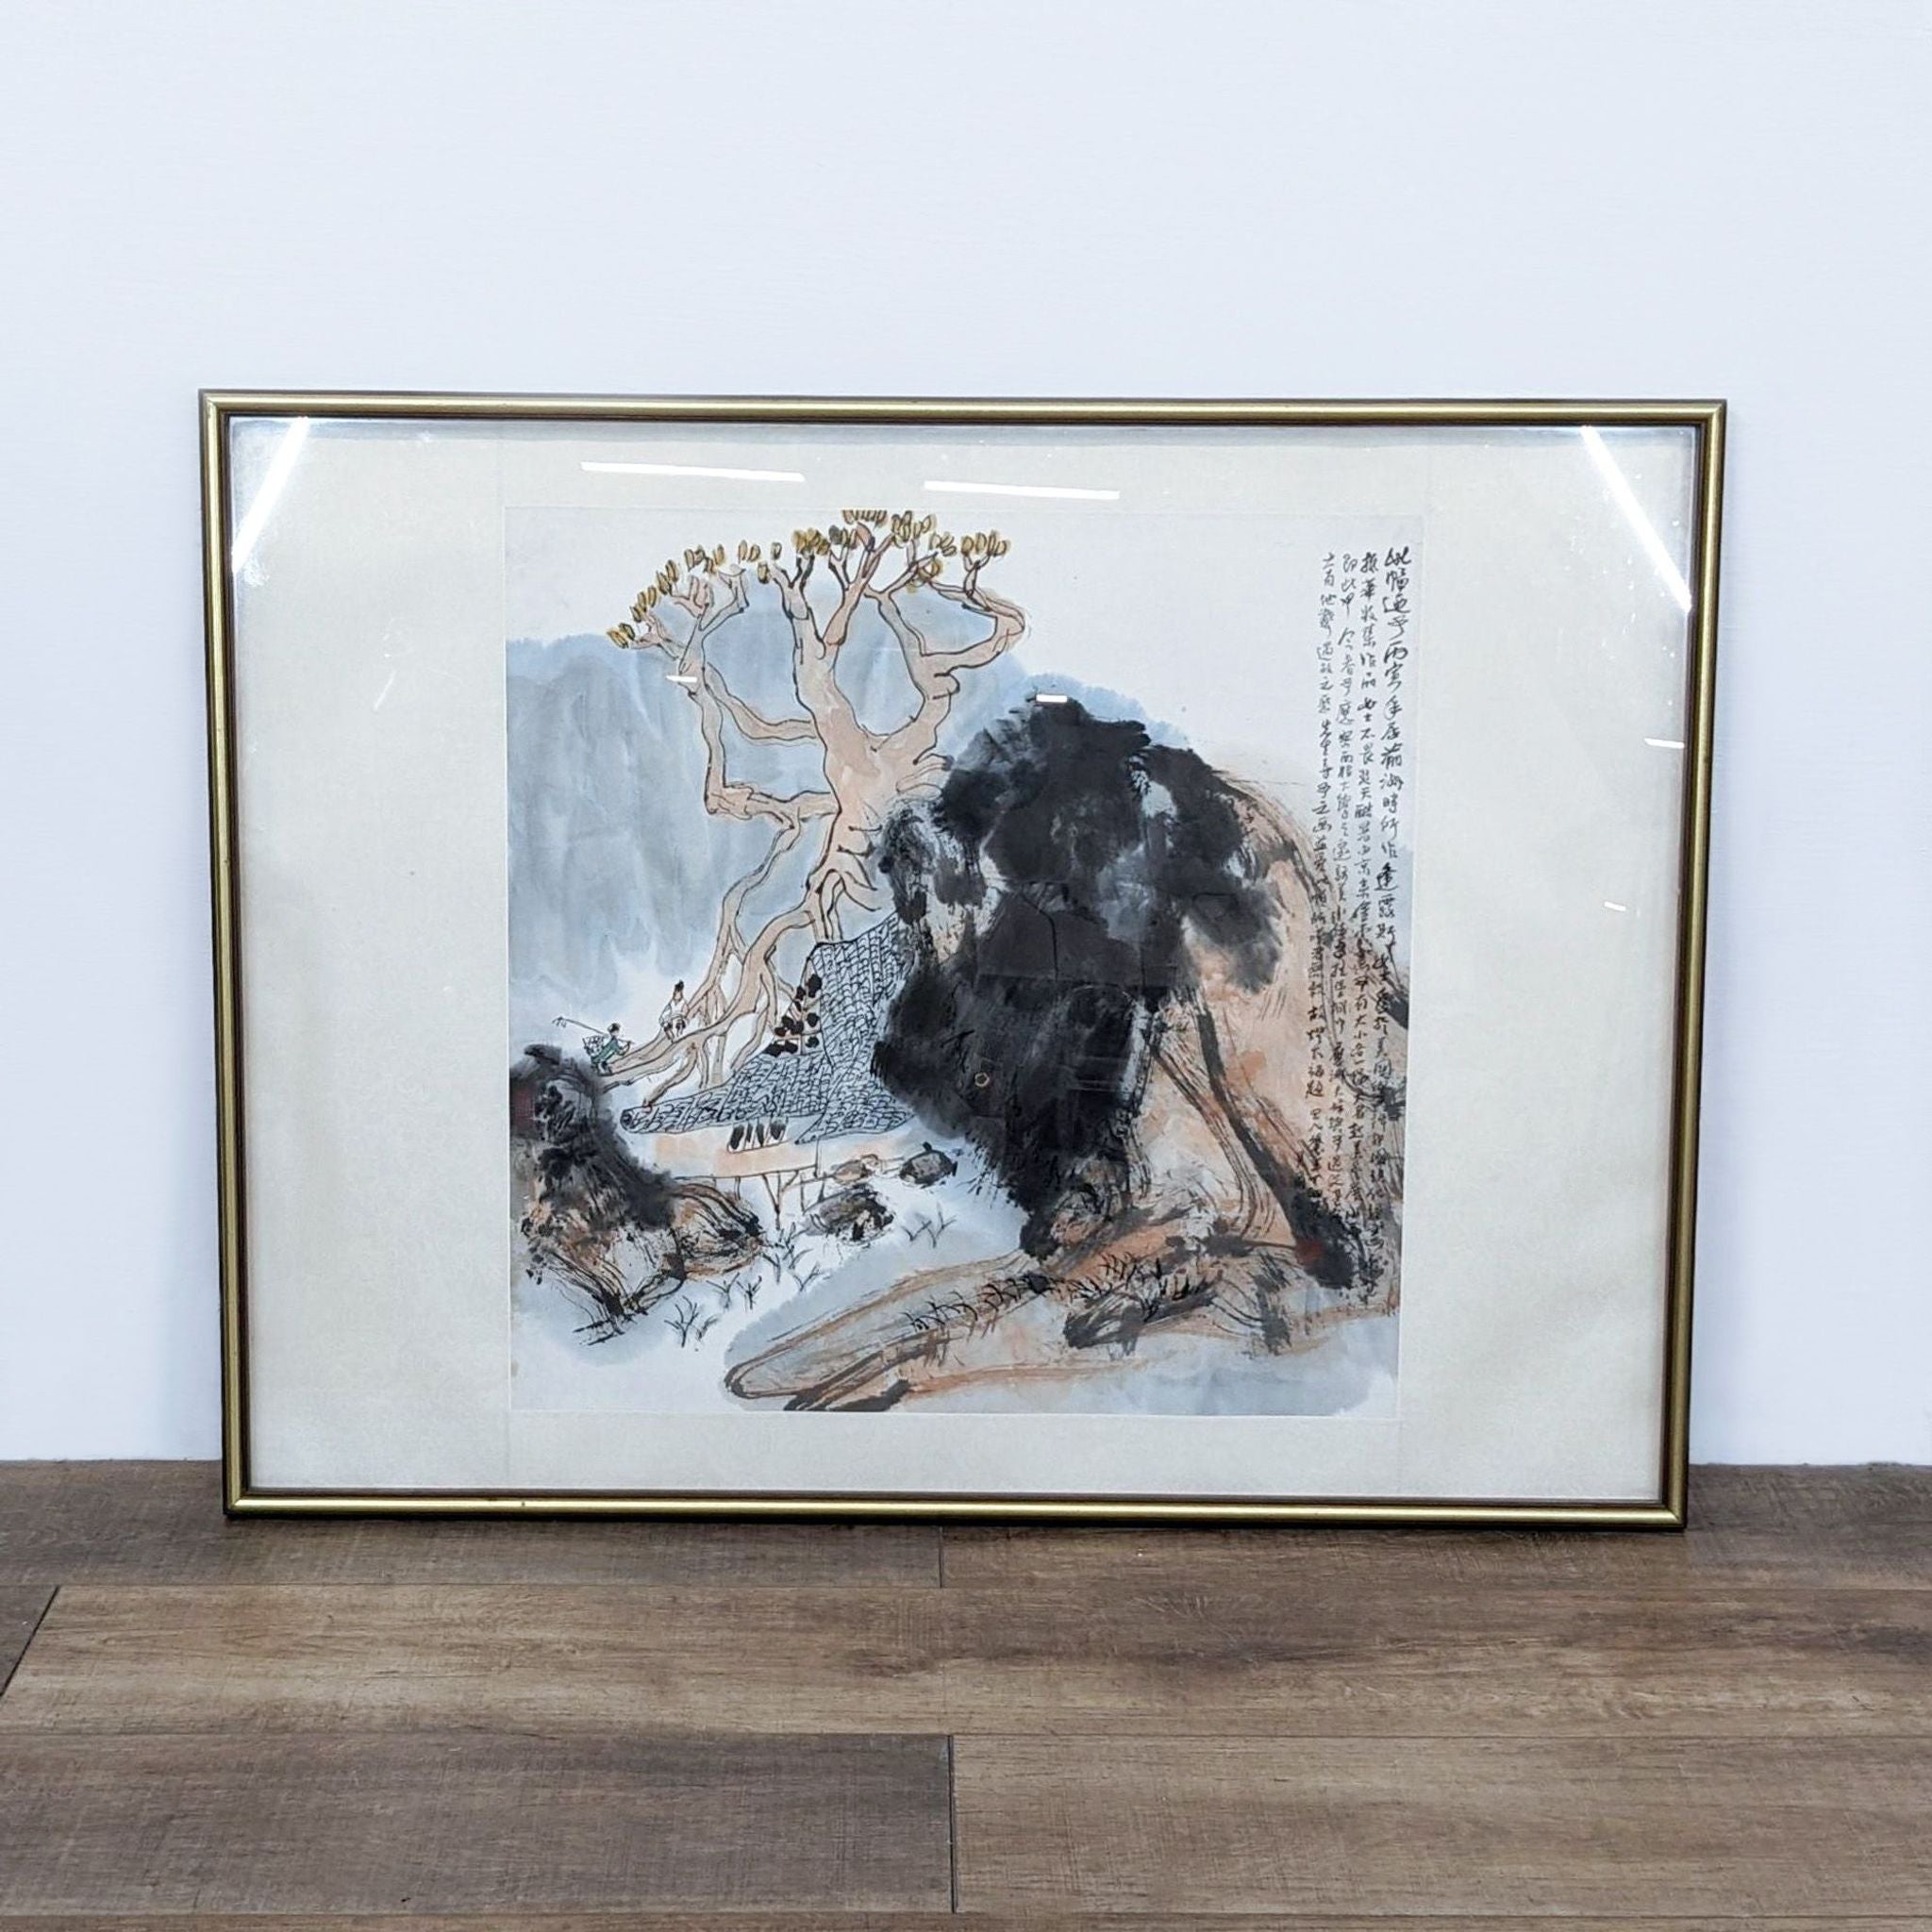 Framed Reperch art print depicting an Asian landscape with detailed ink work, displayed against a wooden floor.